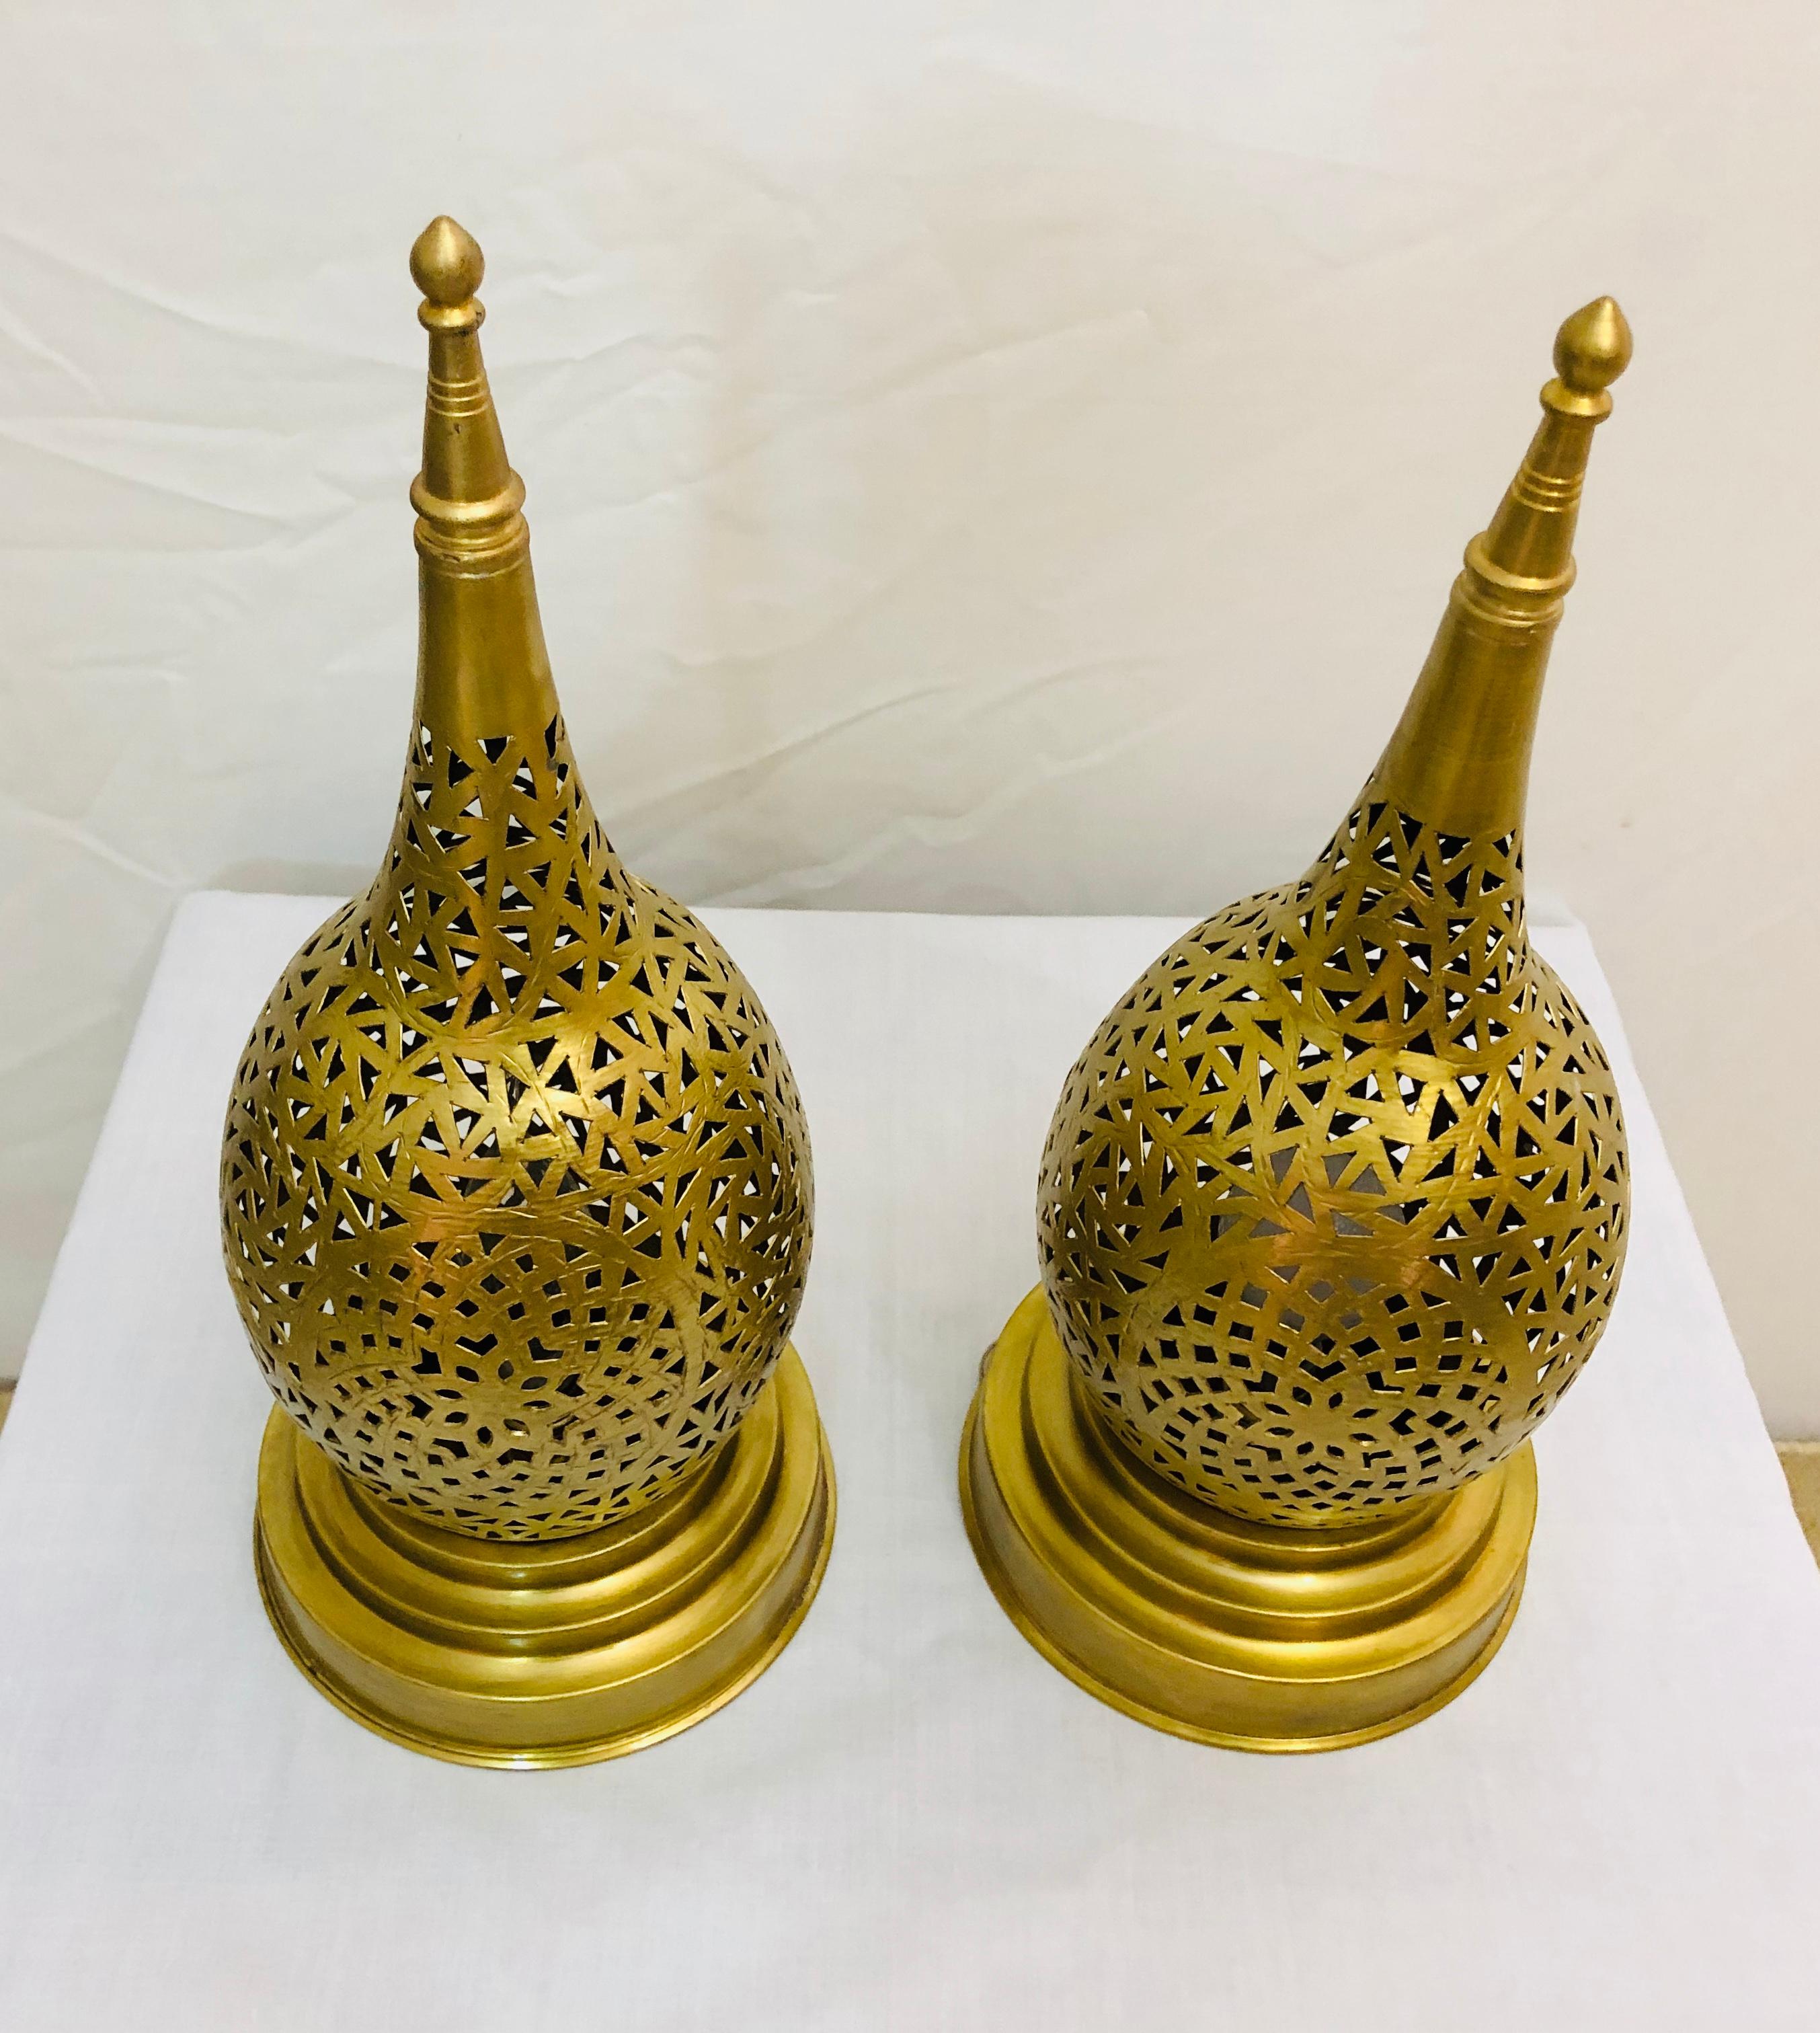 The intricate filigree design work of this handcrafted brass tear-shaped lamp will elevate the ambiance of any room. Featuring a wonderfully unique design aesthetic, these pair of table lamps emit a soft, filtered light.

Dimensions: 6.25